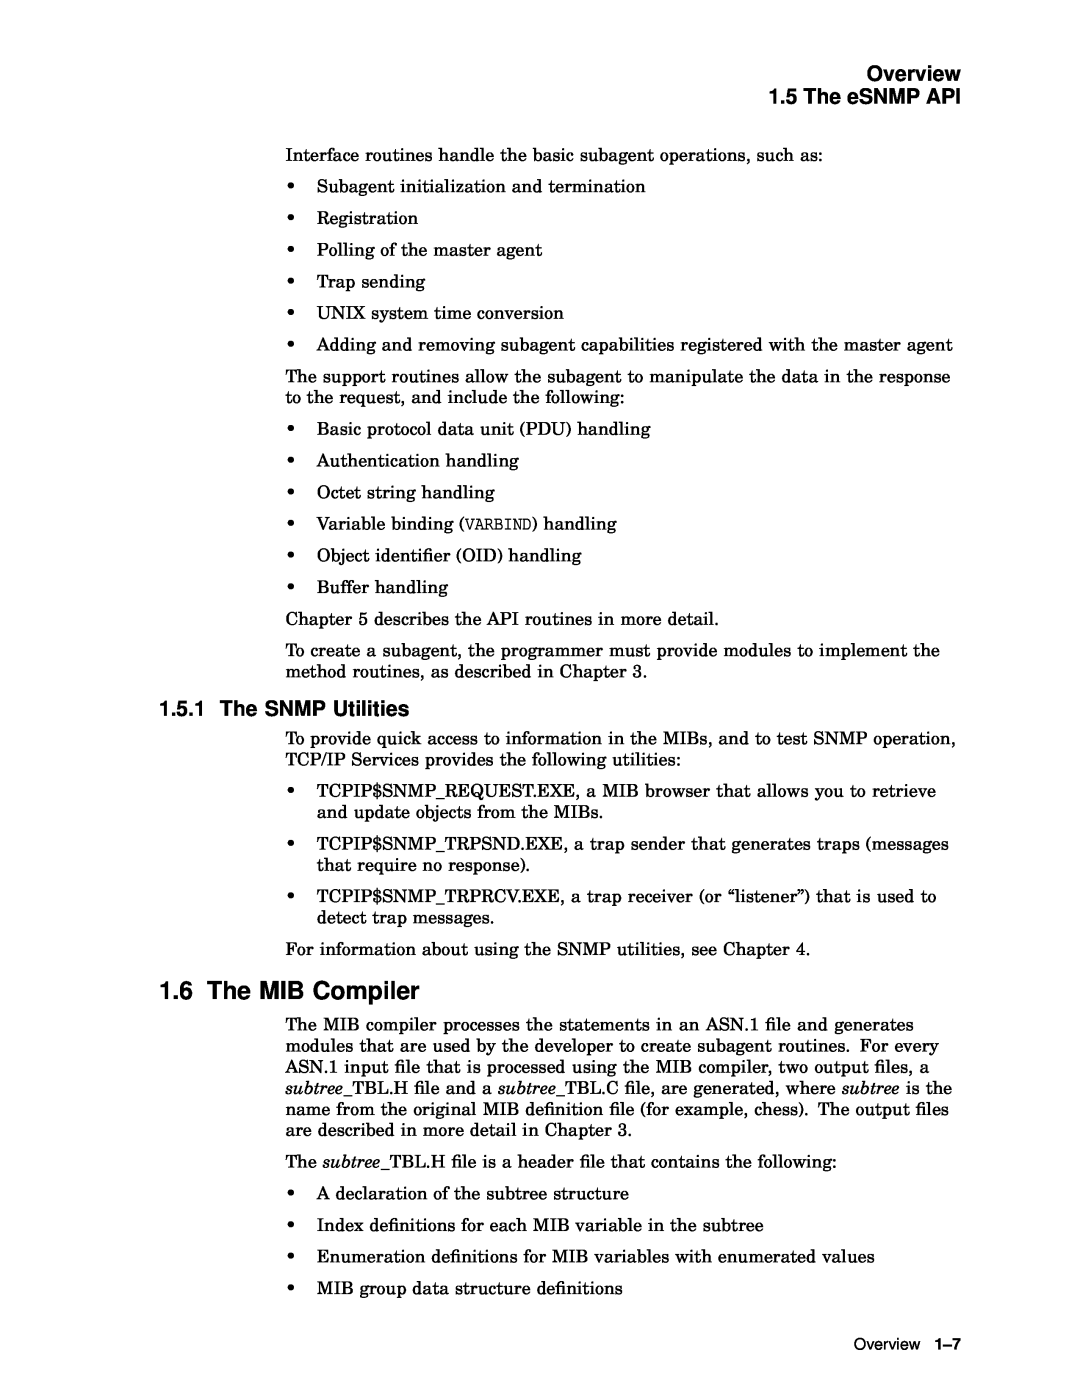 Compaq AAR04BCTE manual The MIB Compiler, Overview 1.5 The eSNMP API, The SNMP Utilities 